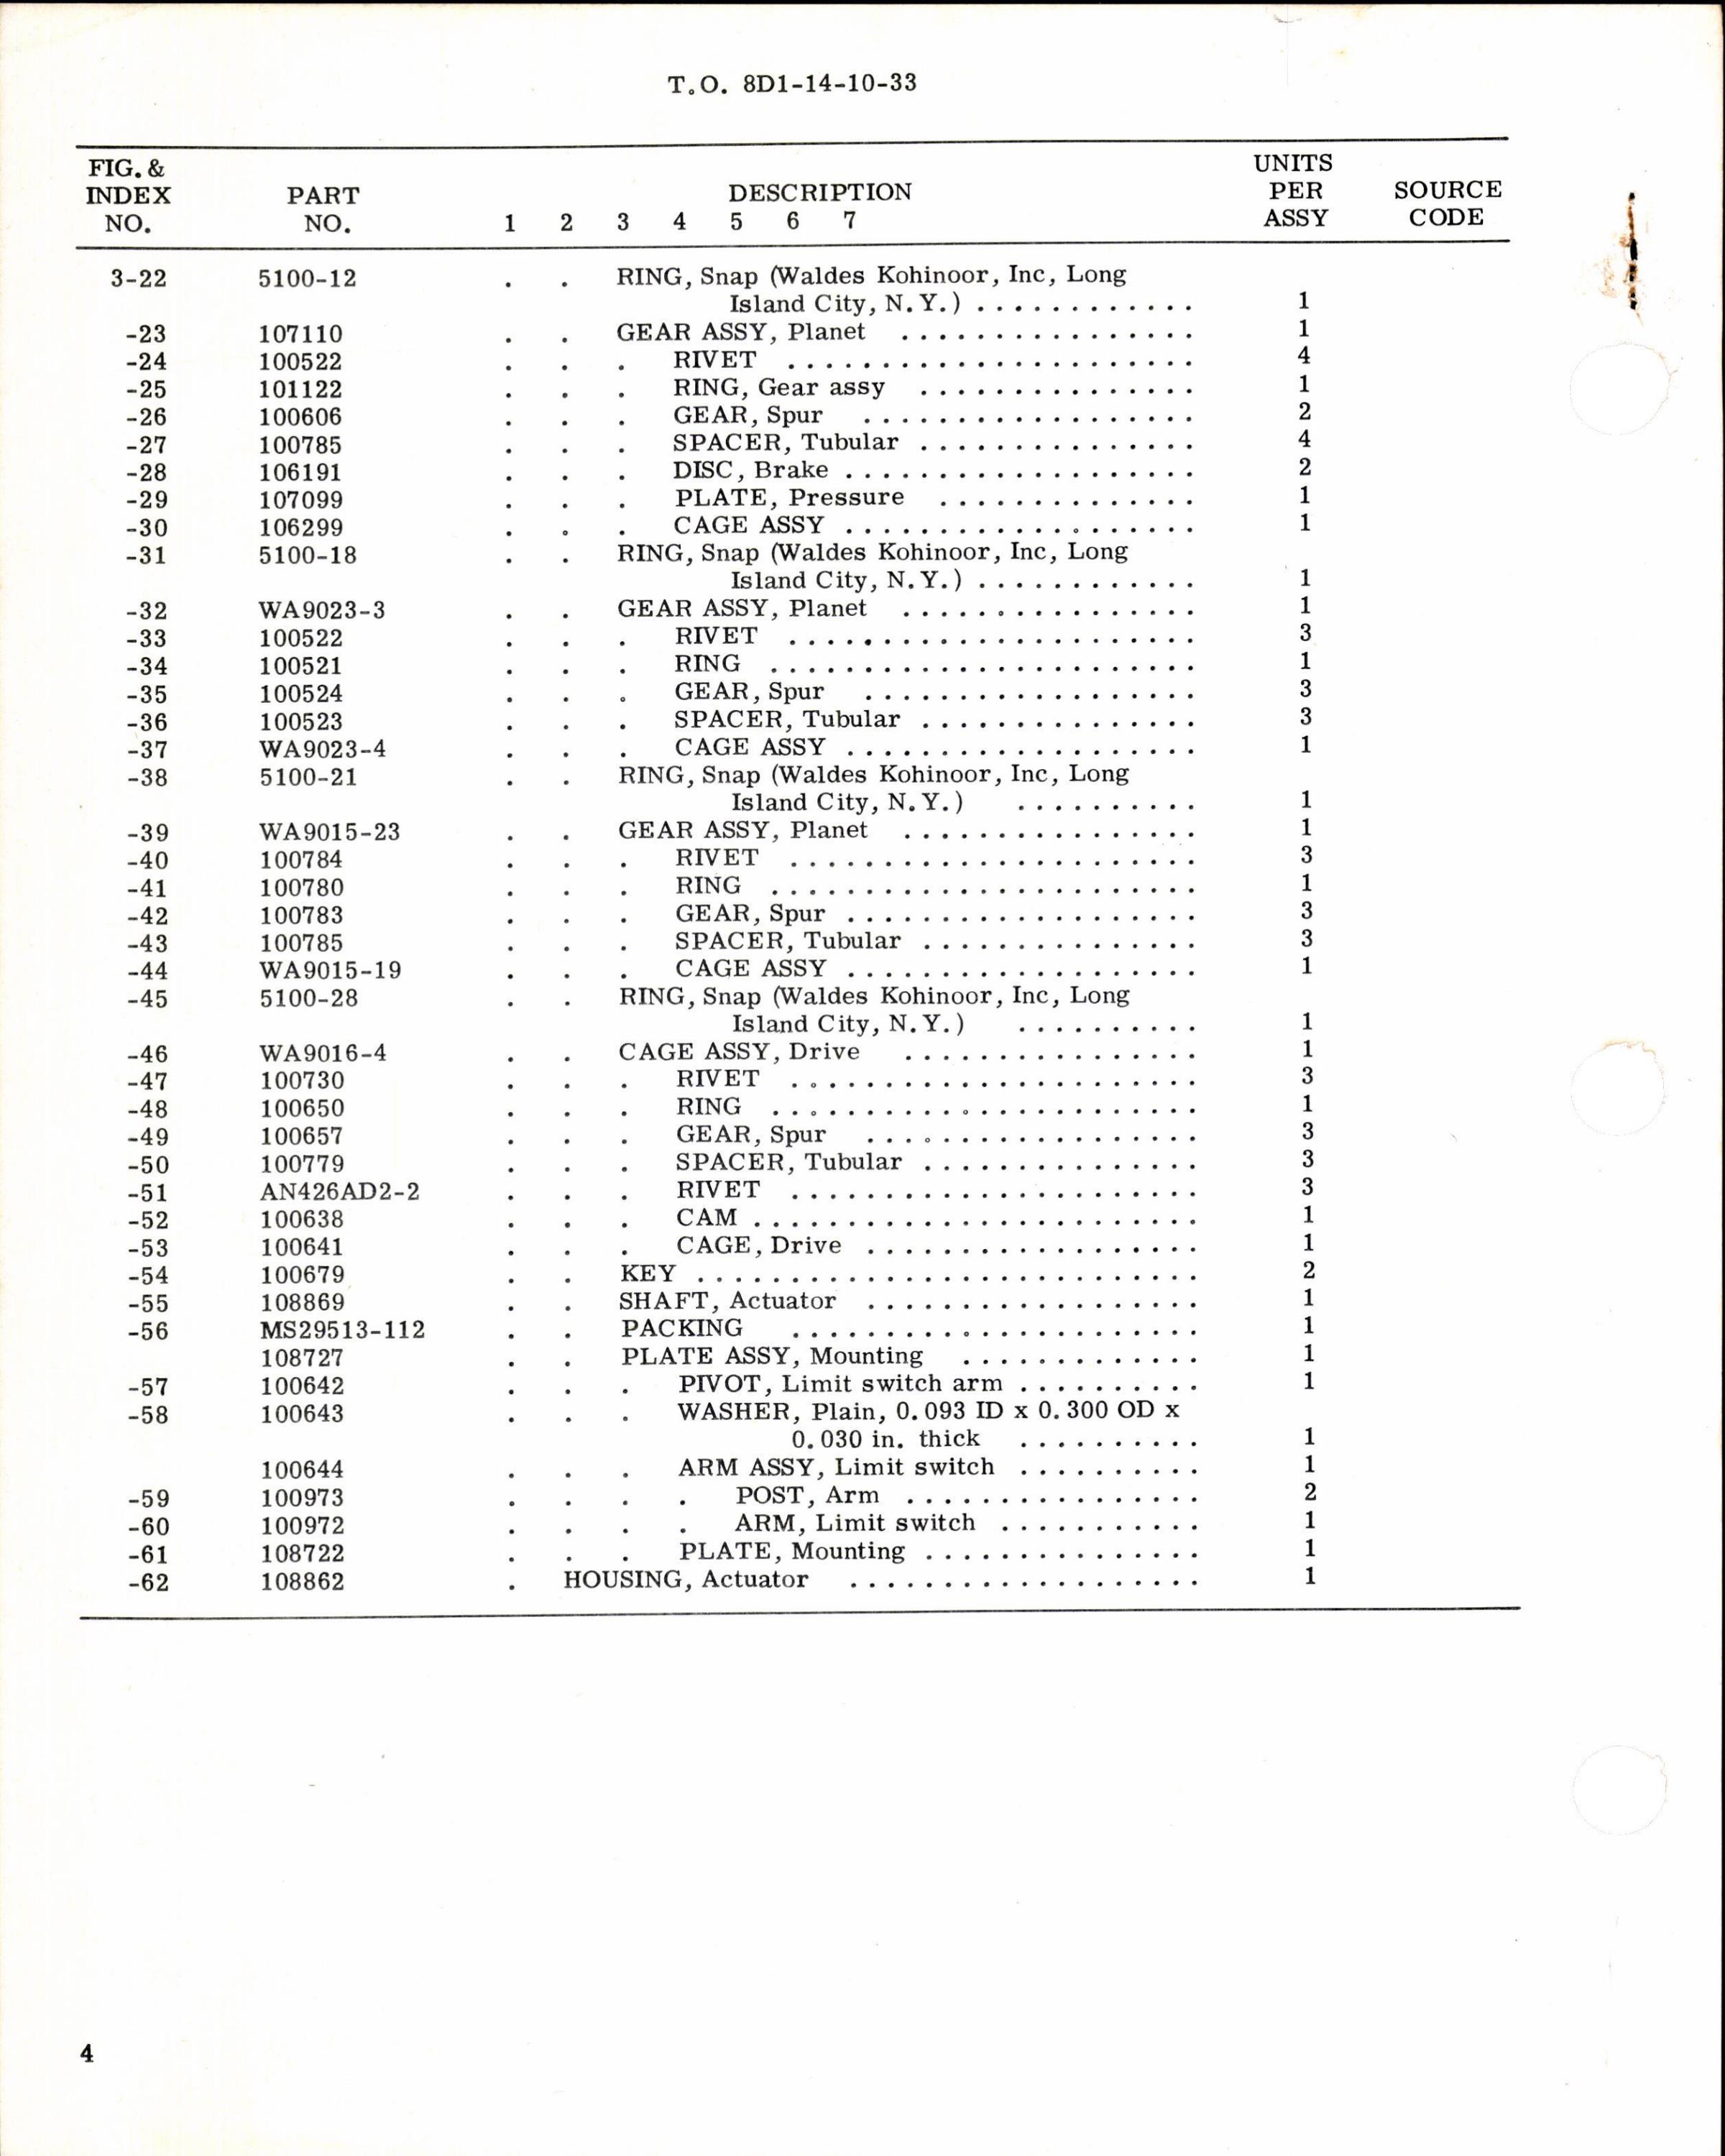 Sample page 4 from AirCorps Library document: Instructions w Parts Breakdown for Actuator Assembly Part 108820